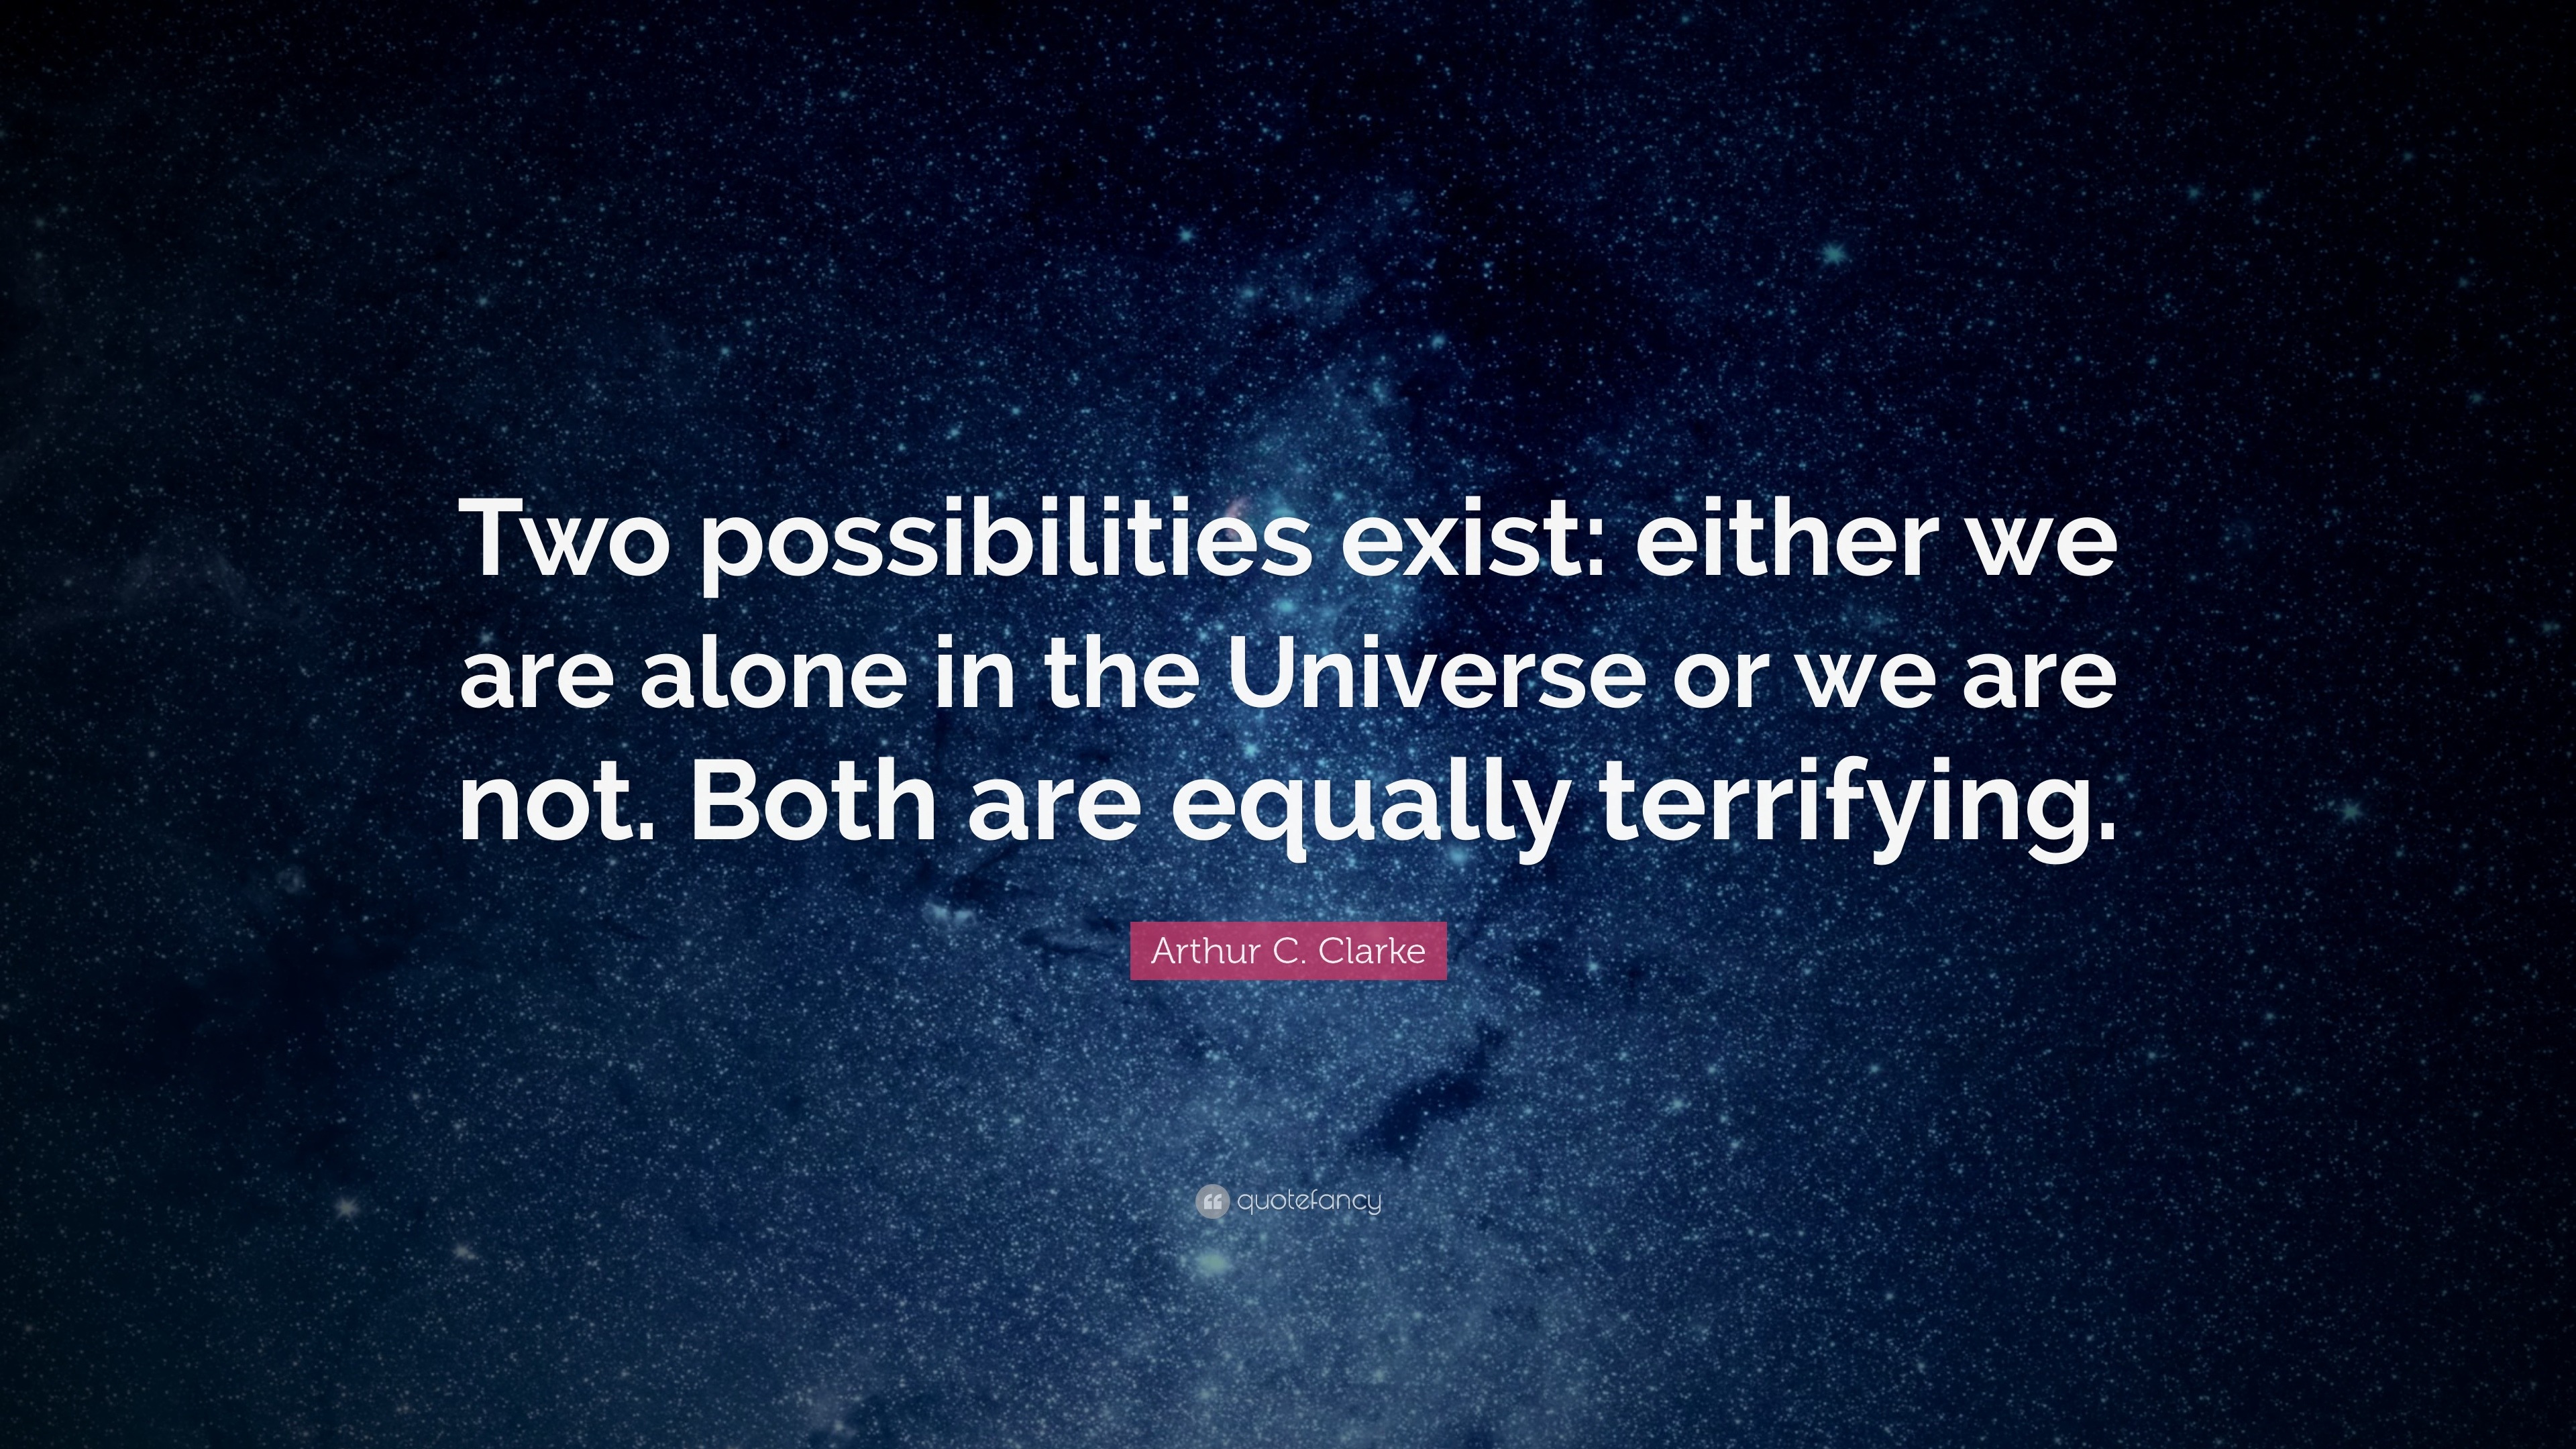 19586-Arthur-C-Clarke-Quote-Two-possibilities-exist-either-we-are-alone.jpg